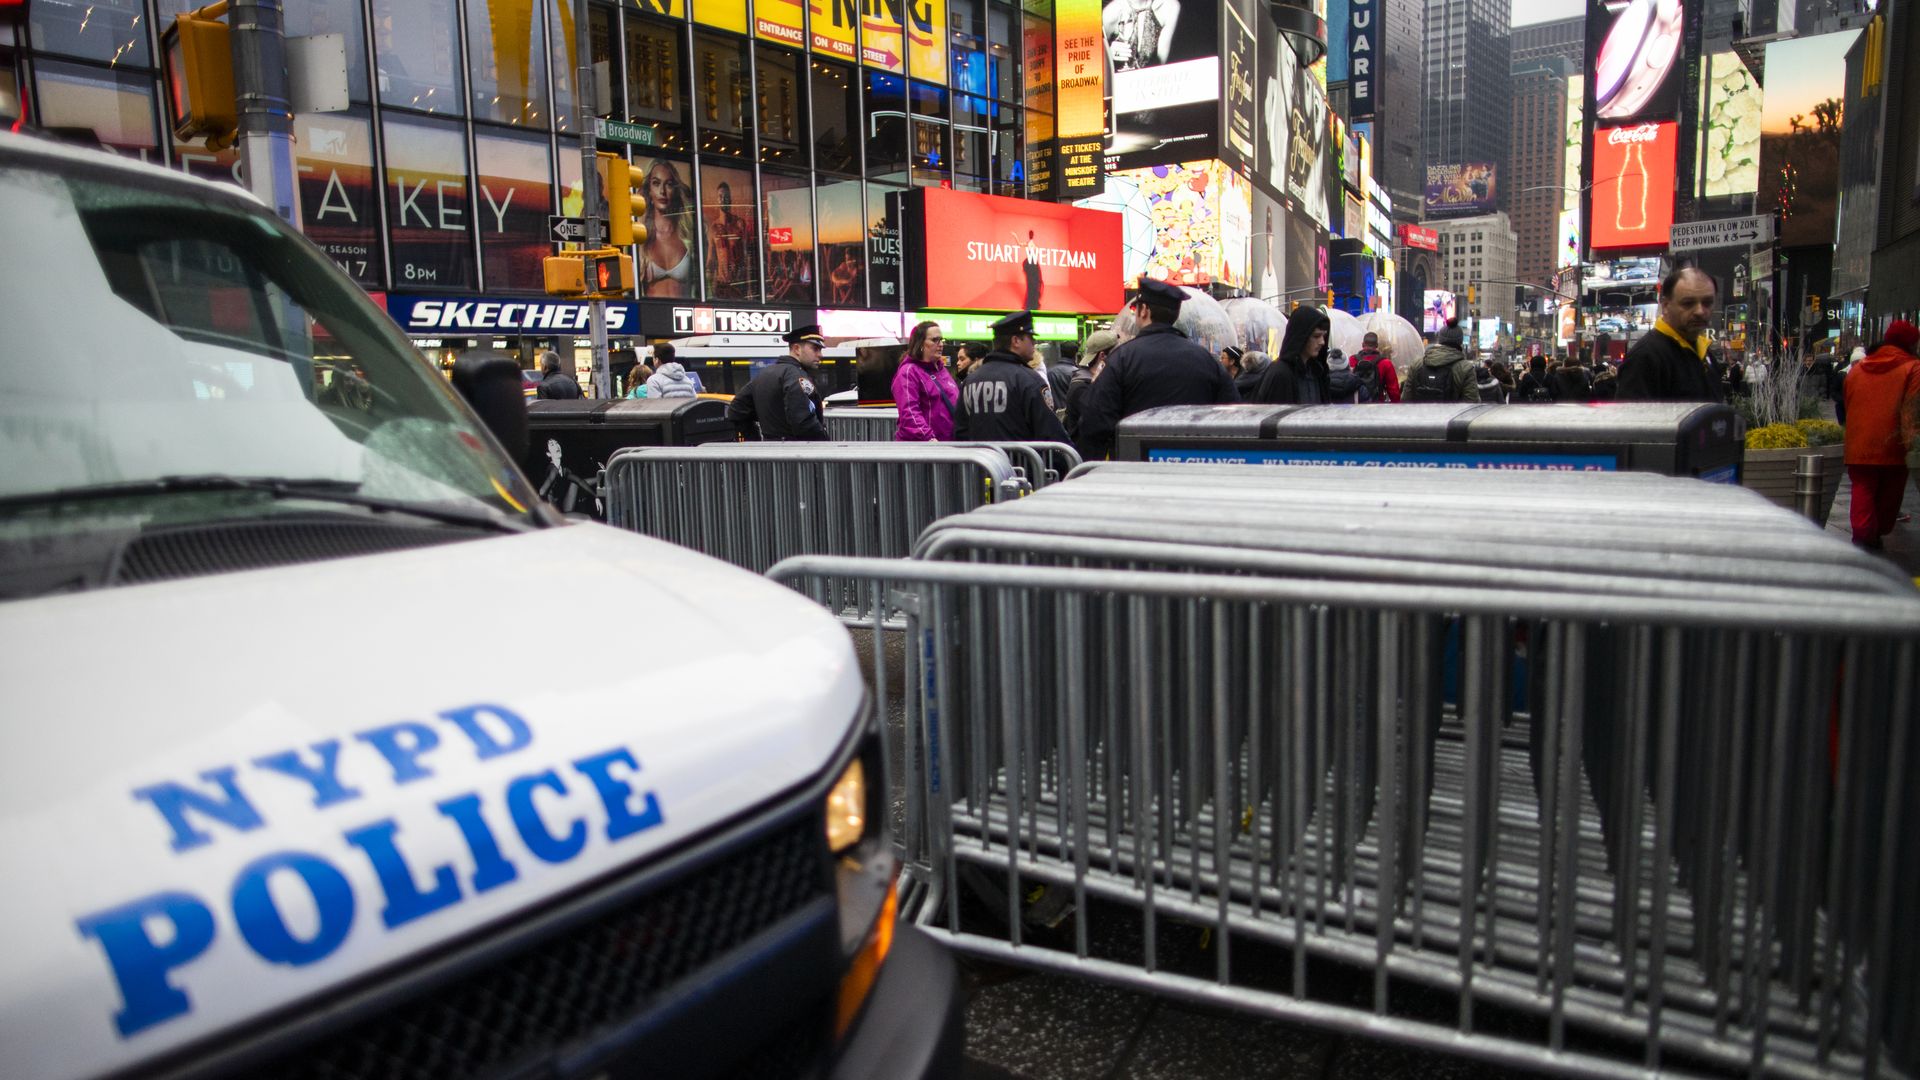 In this image, a NYPD vehicle says "NYPD police" on it